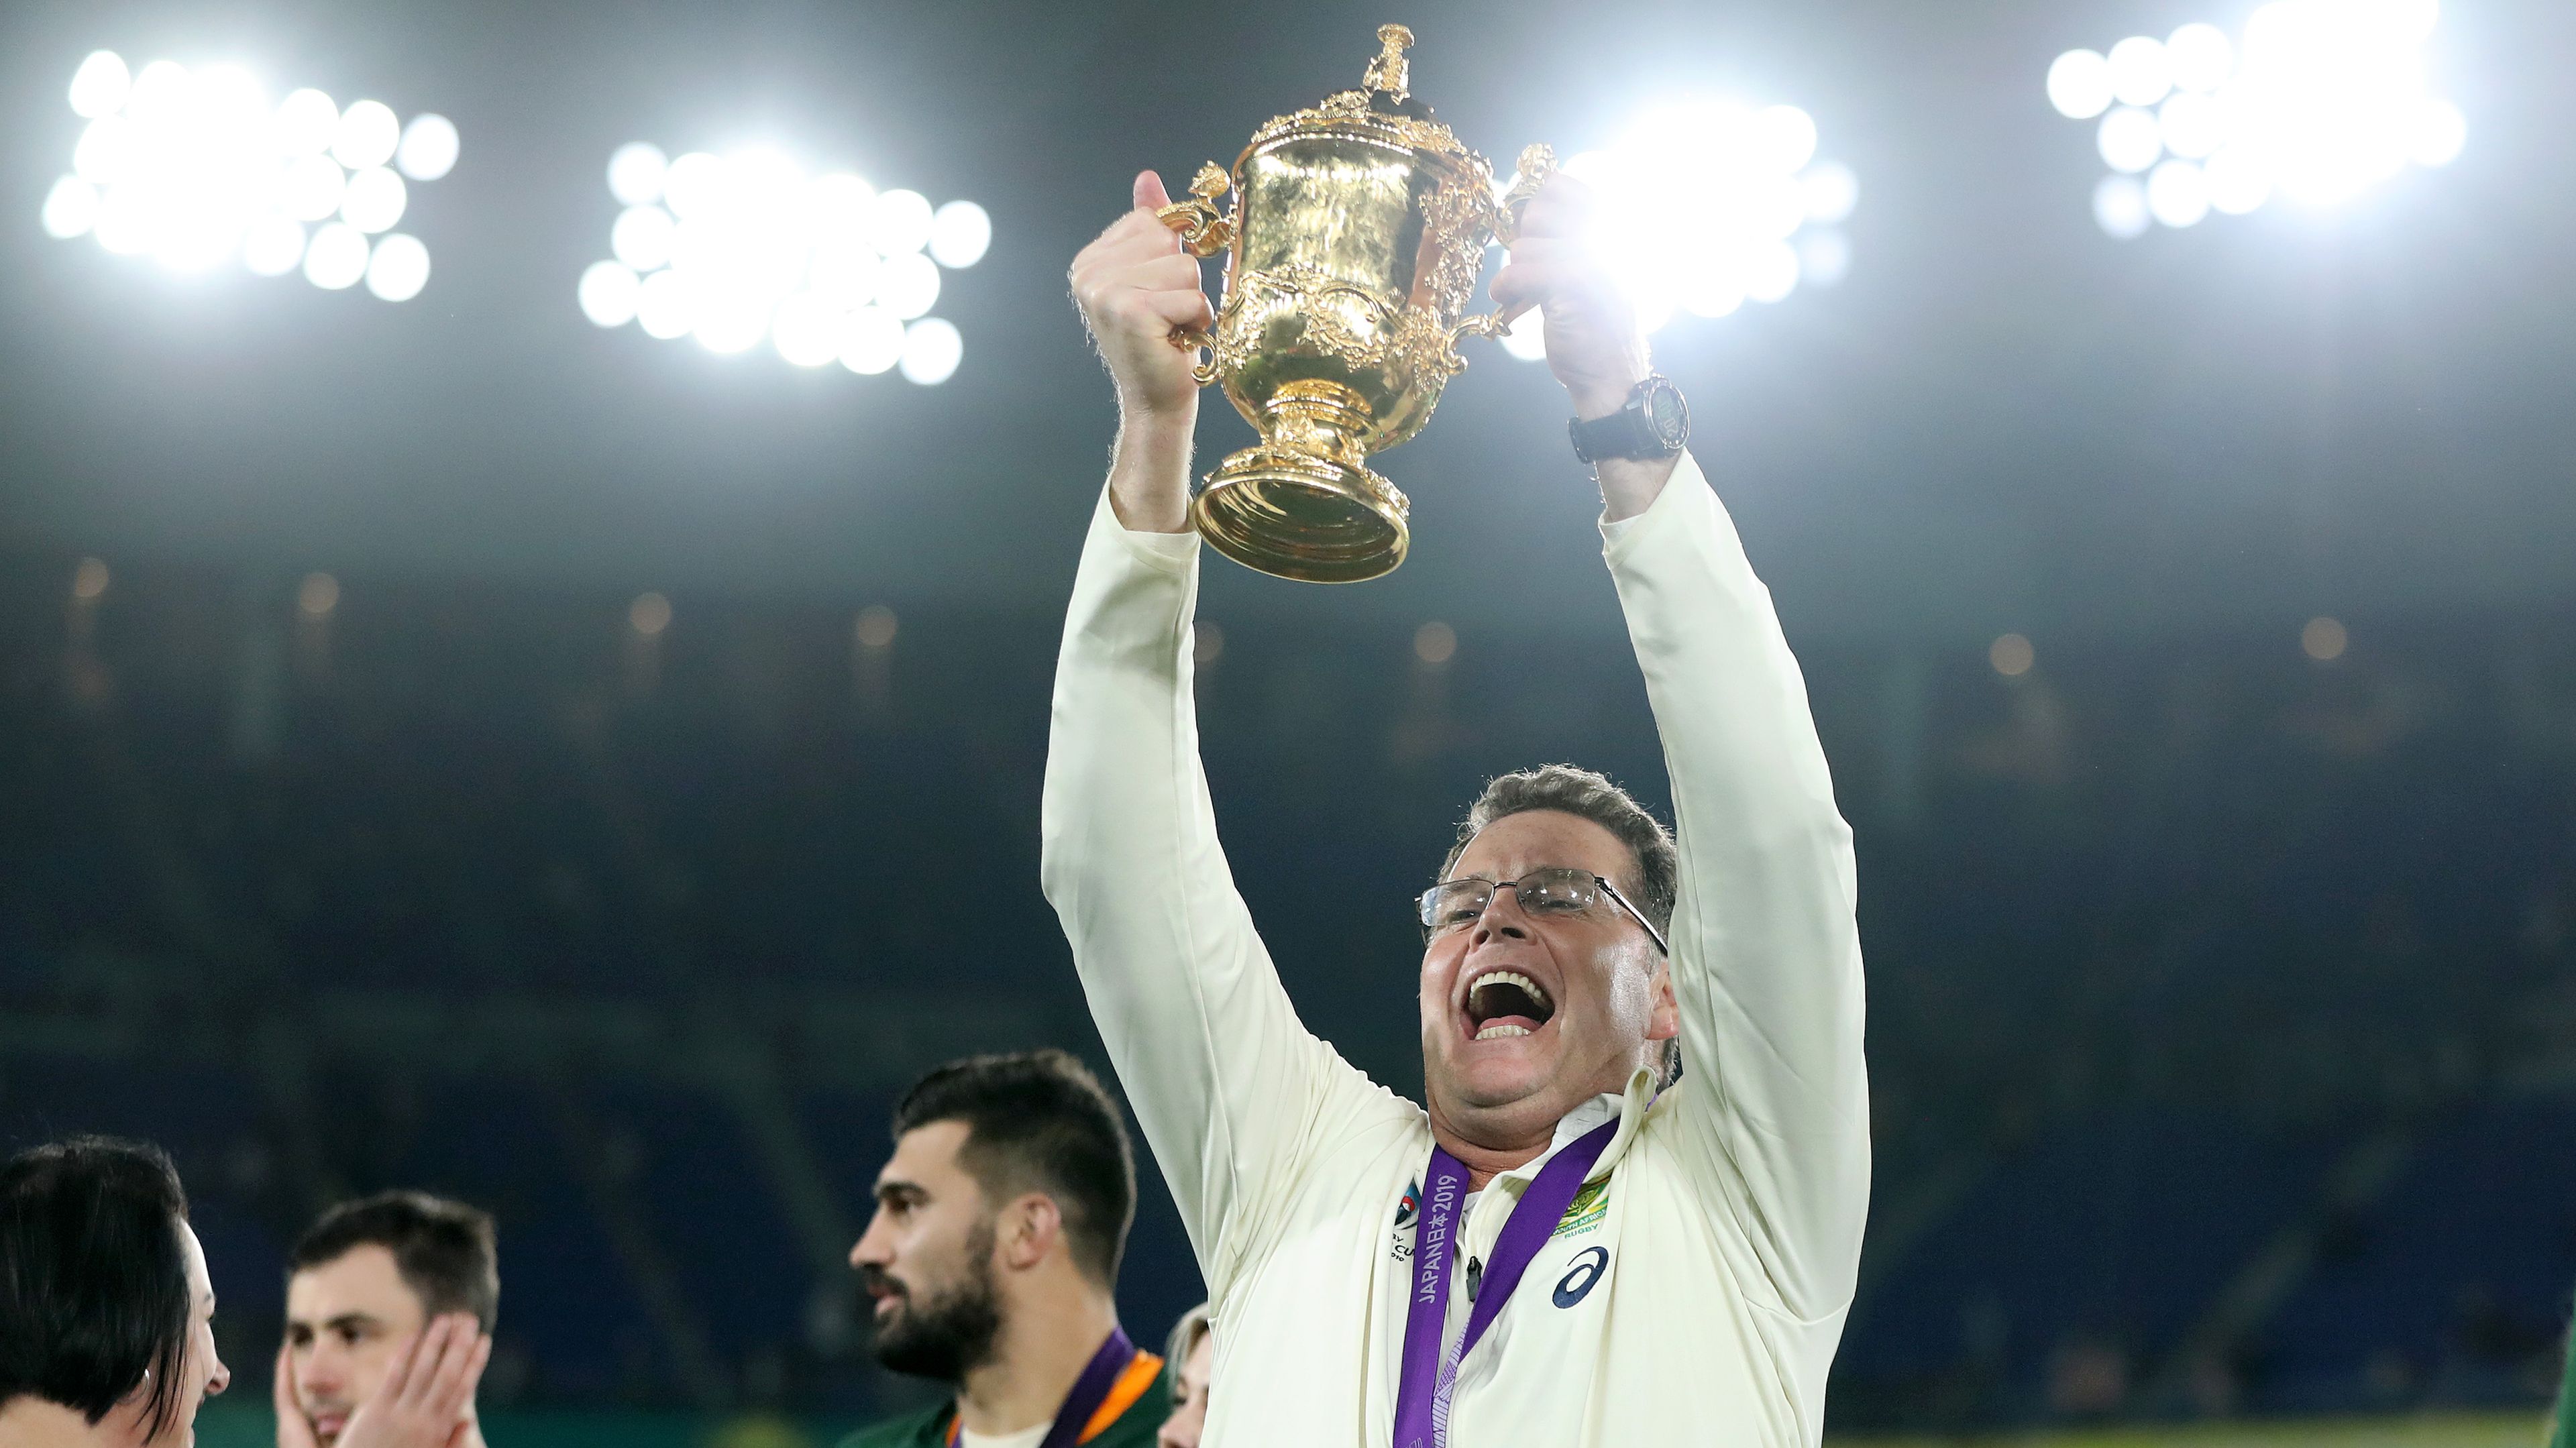 Rassie Erasmus celebrates victory in the 2019 Rugby World Cup.